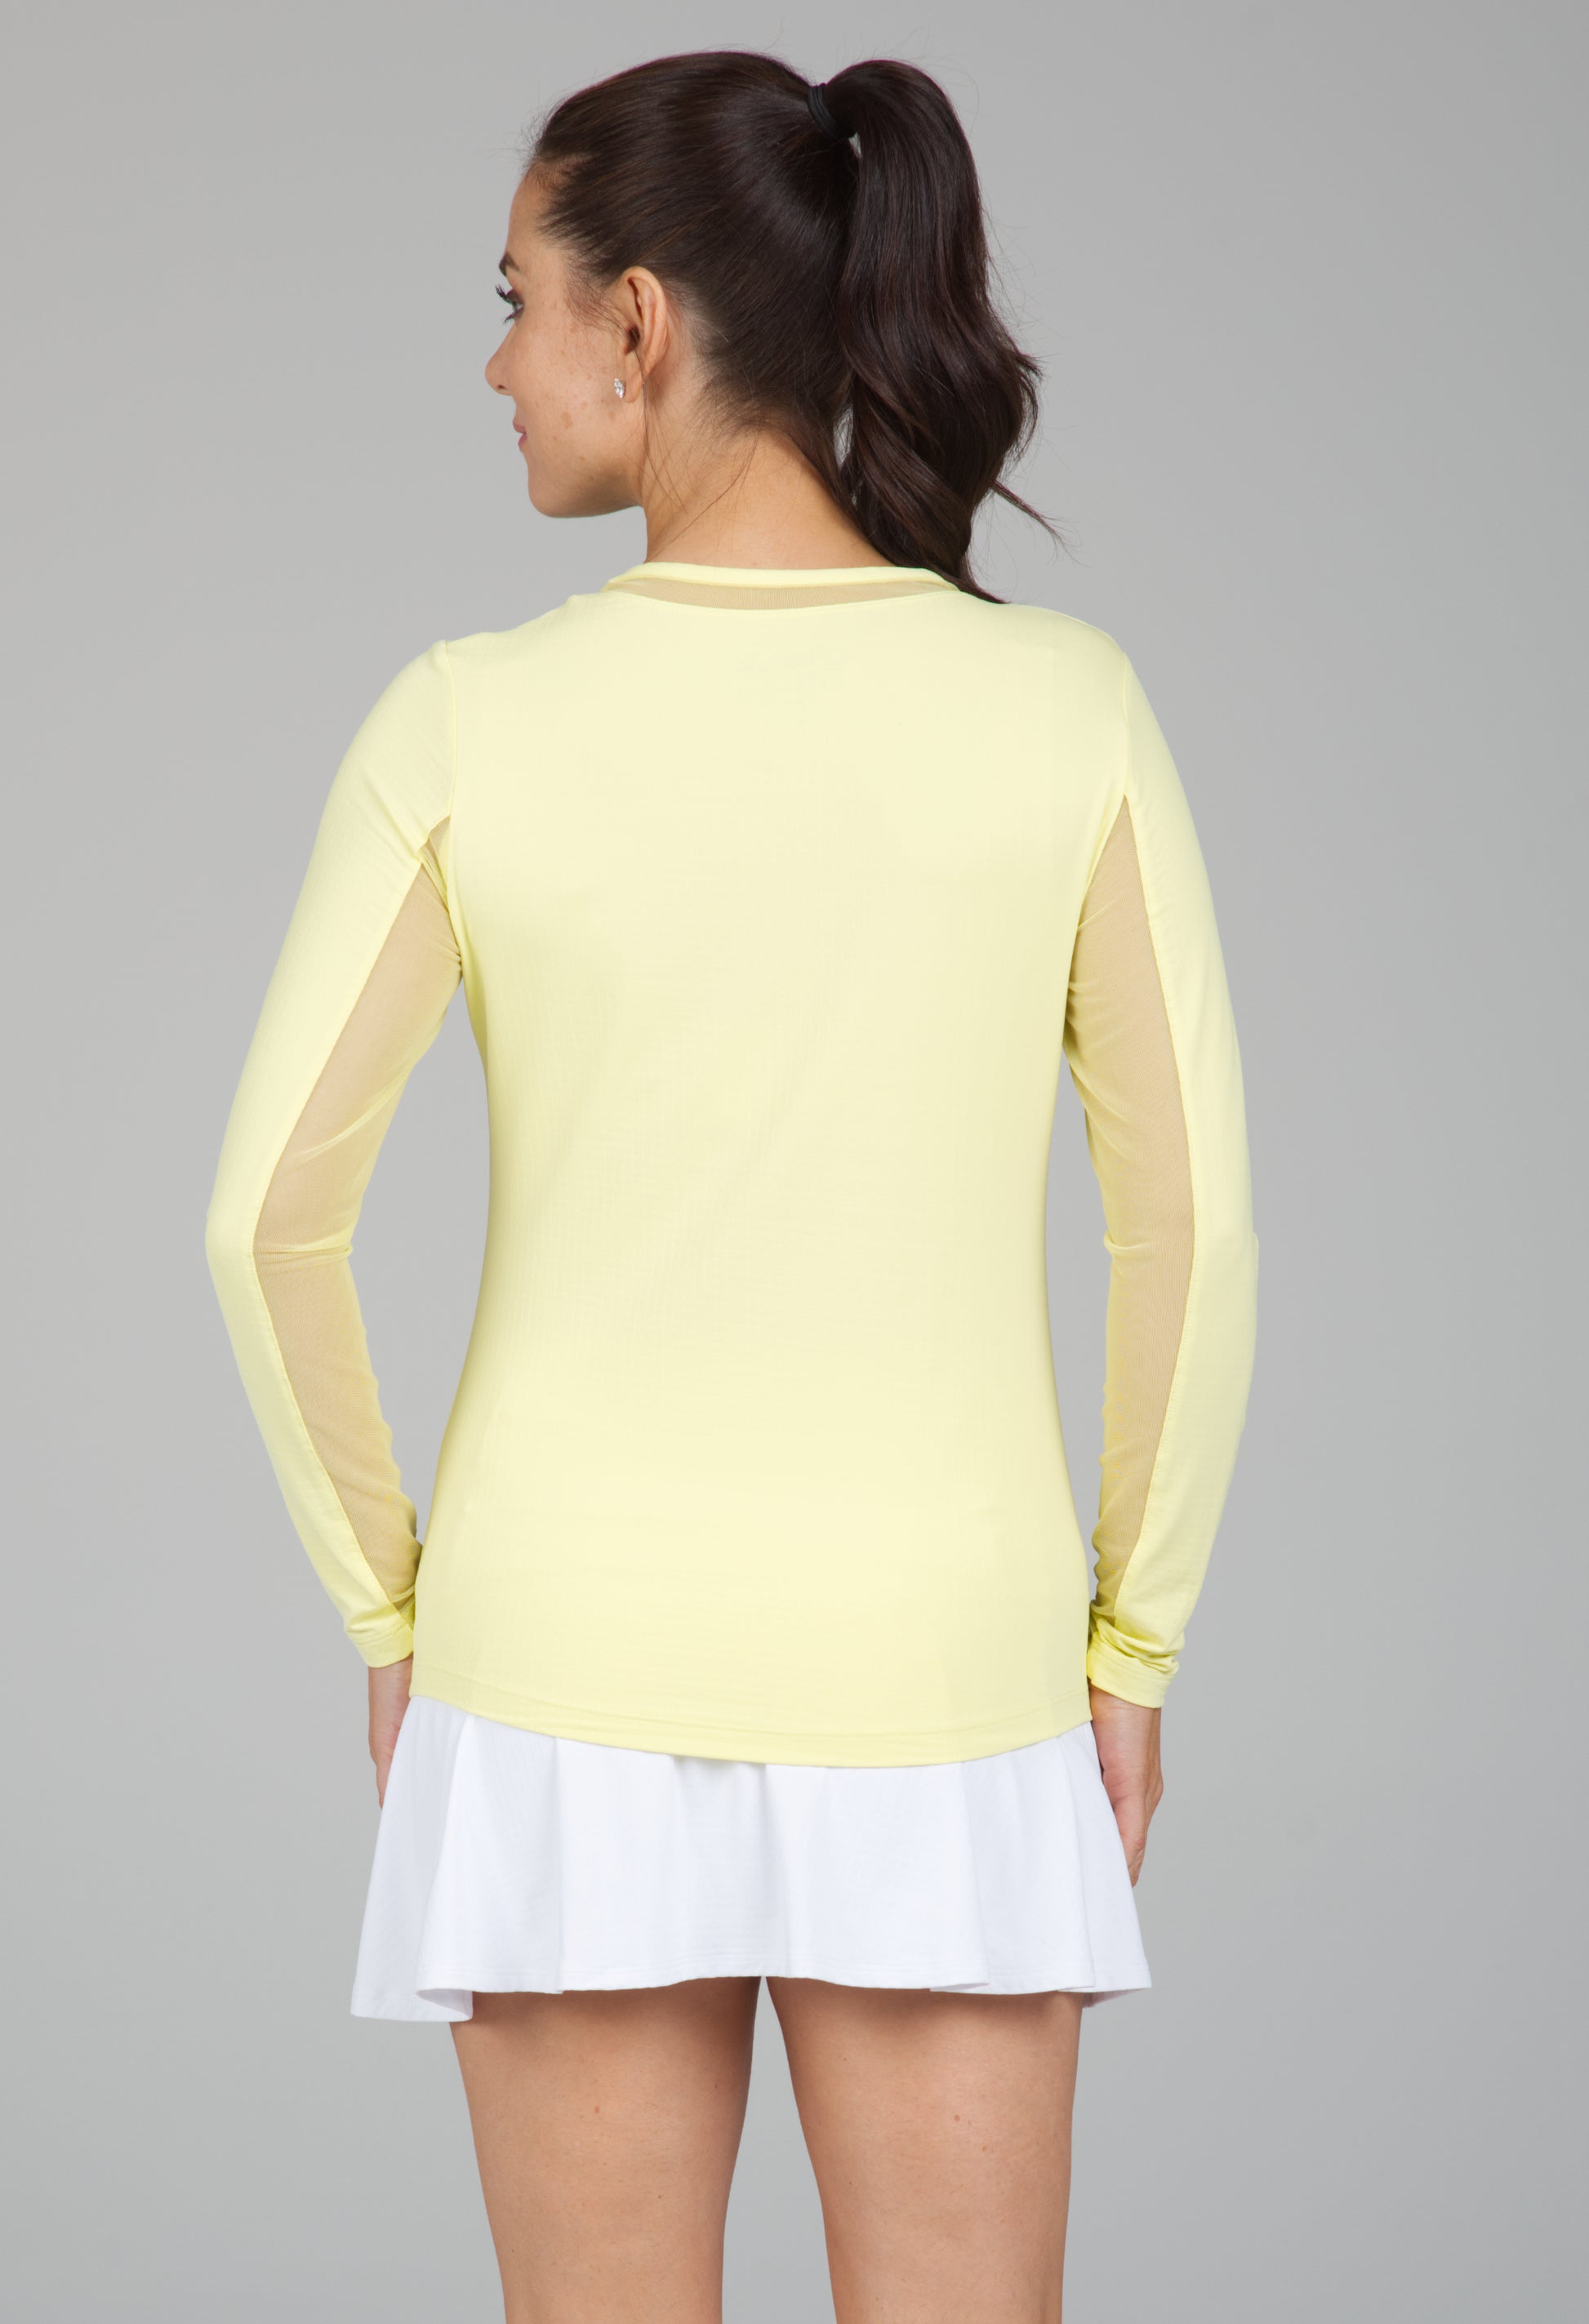 IBKÜL - Long Sleeve Crew Neck with Mesh - 83000 - Color: Butter